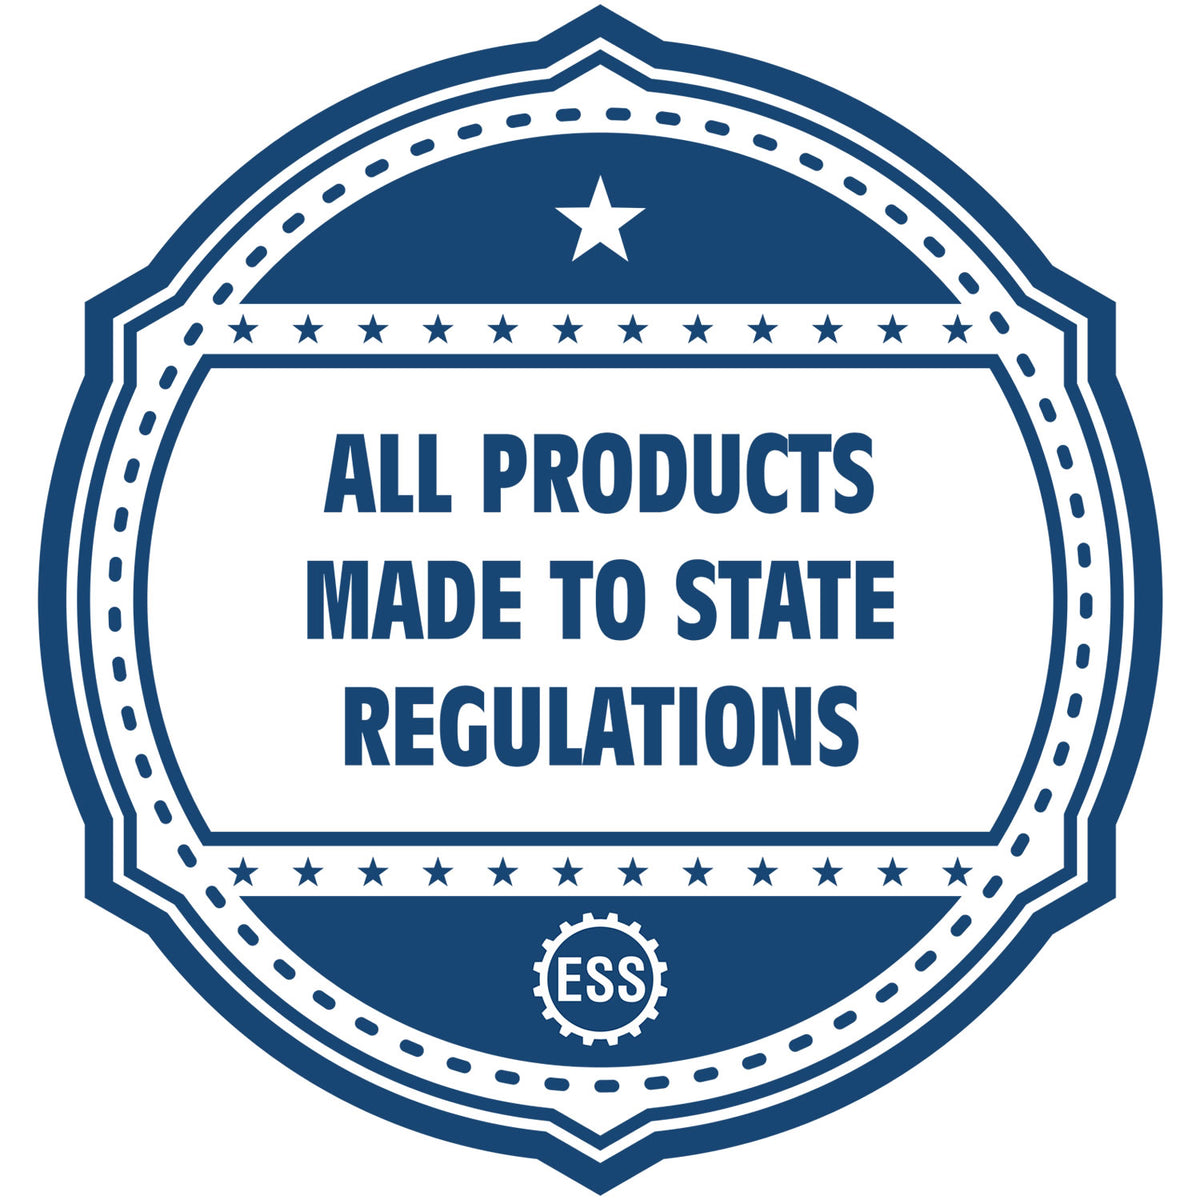 A blue icon or badge for the Hybrid North Dakota Architect Seal showing that this product is made in compliance with state regulations.